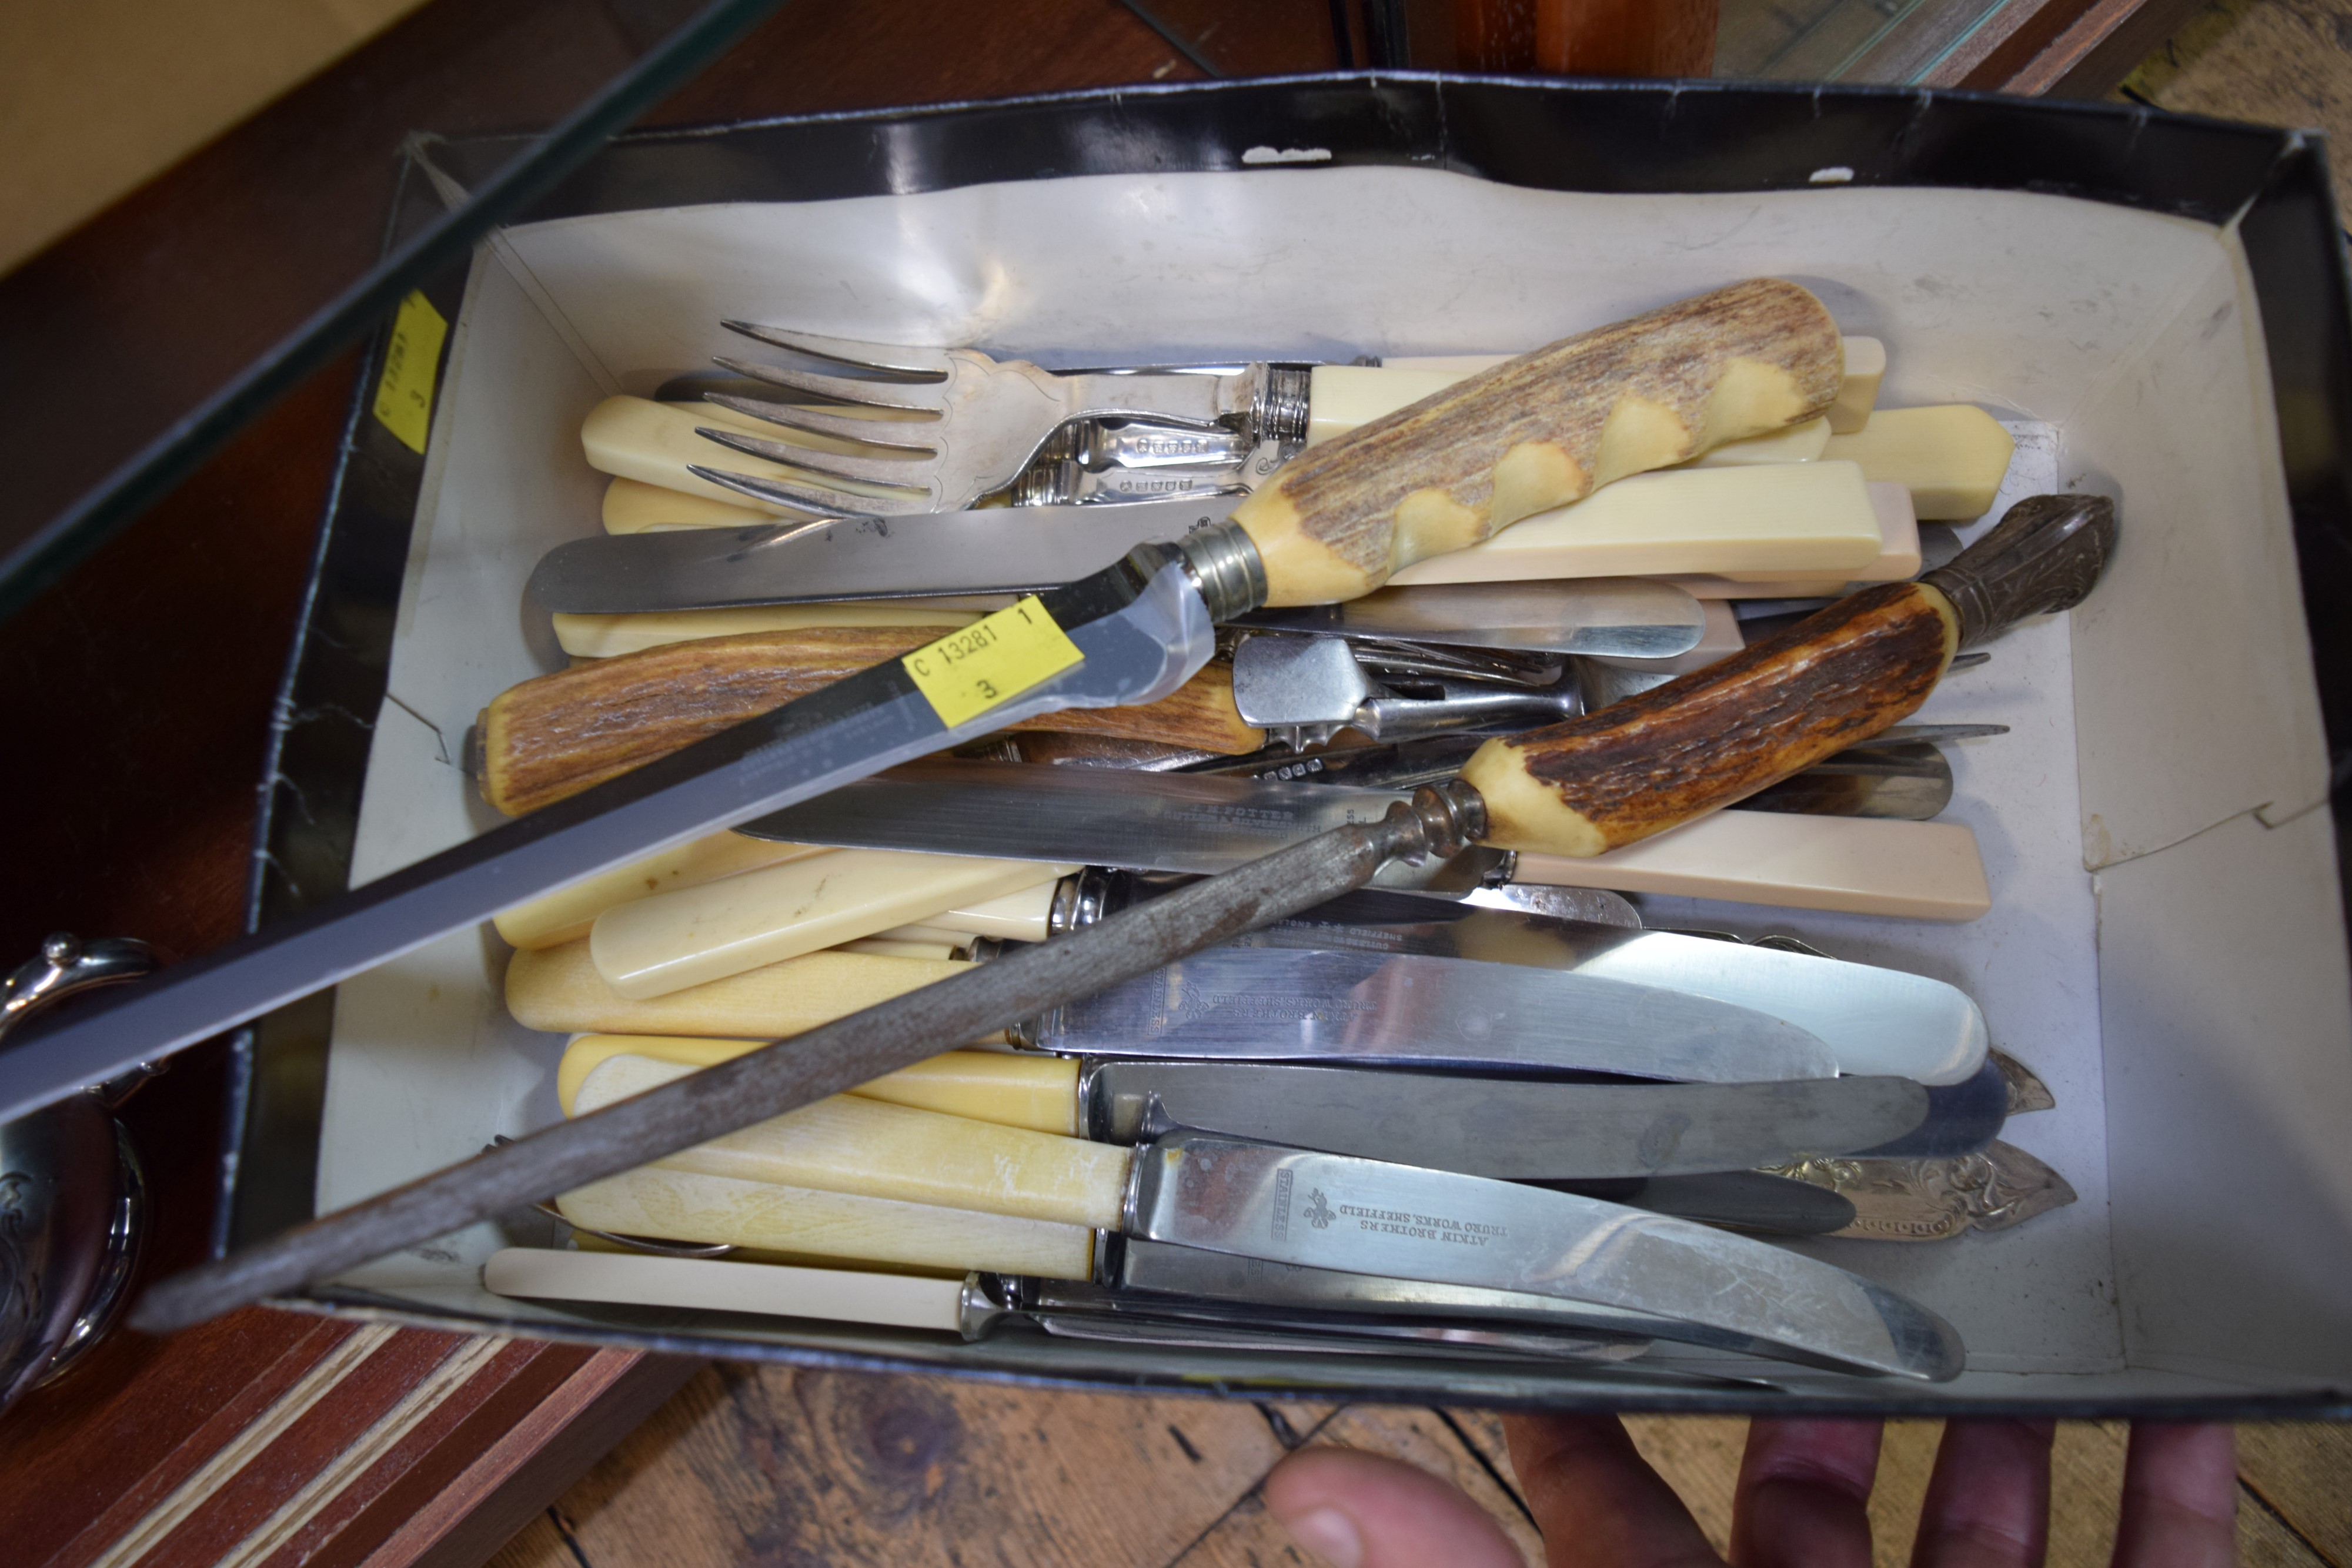 A quantity of bone handled knives and other cutlery.